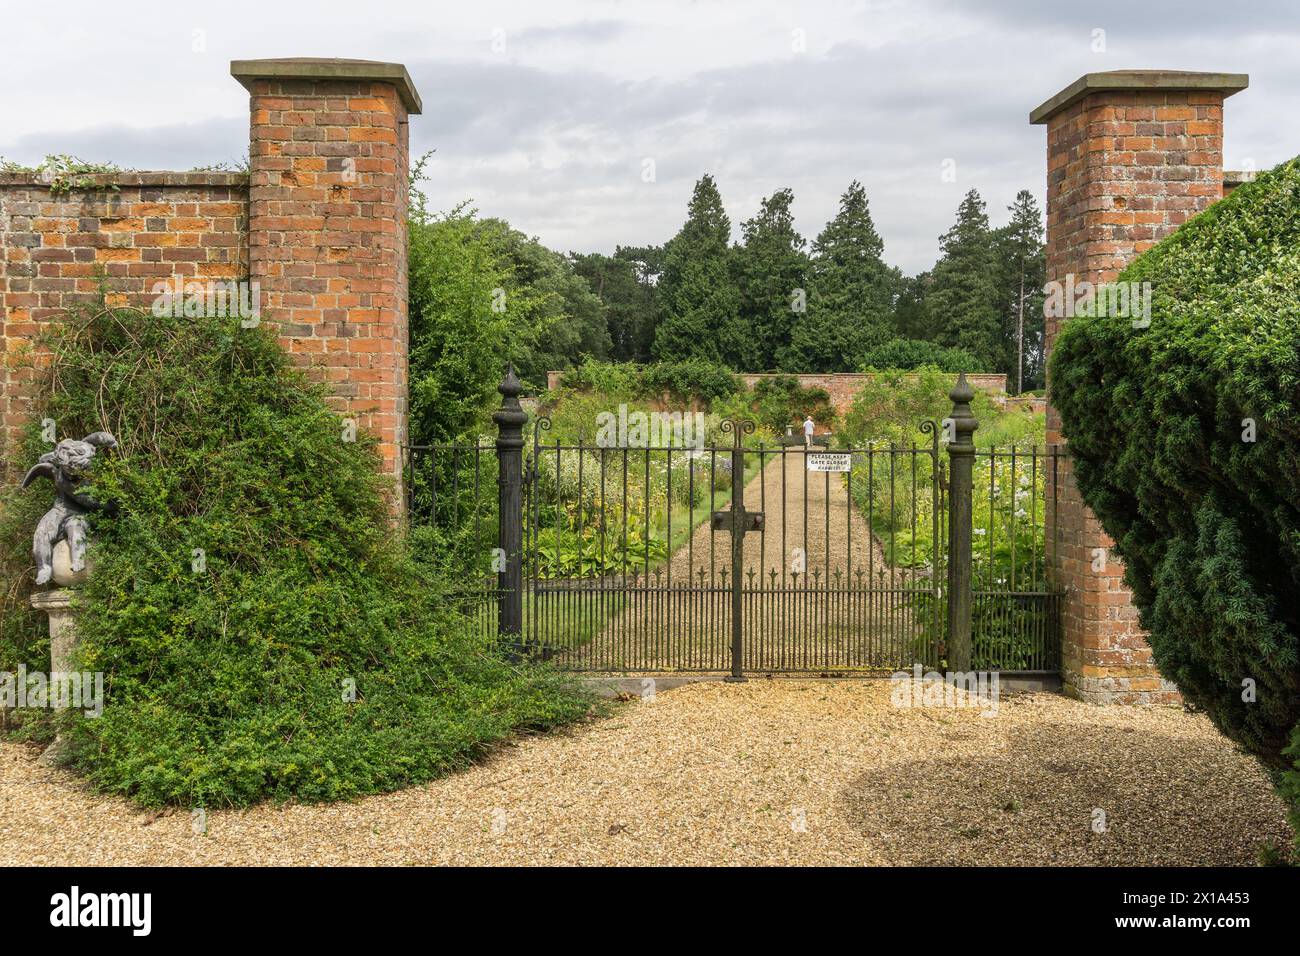 Gated entrance to  the Walled Garden at Turvey House, an 18th century English country house, Turvey, Bedfordshire, UK Stock Photo